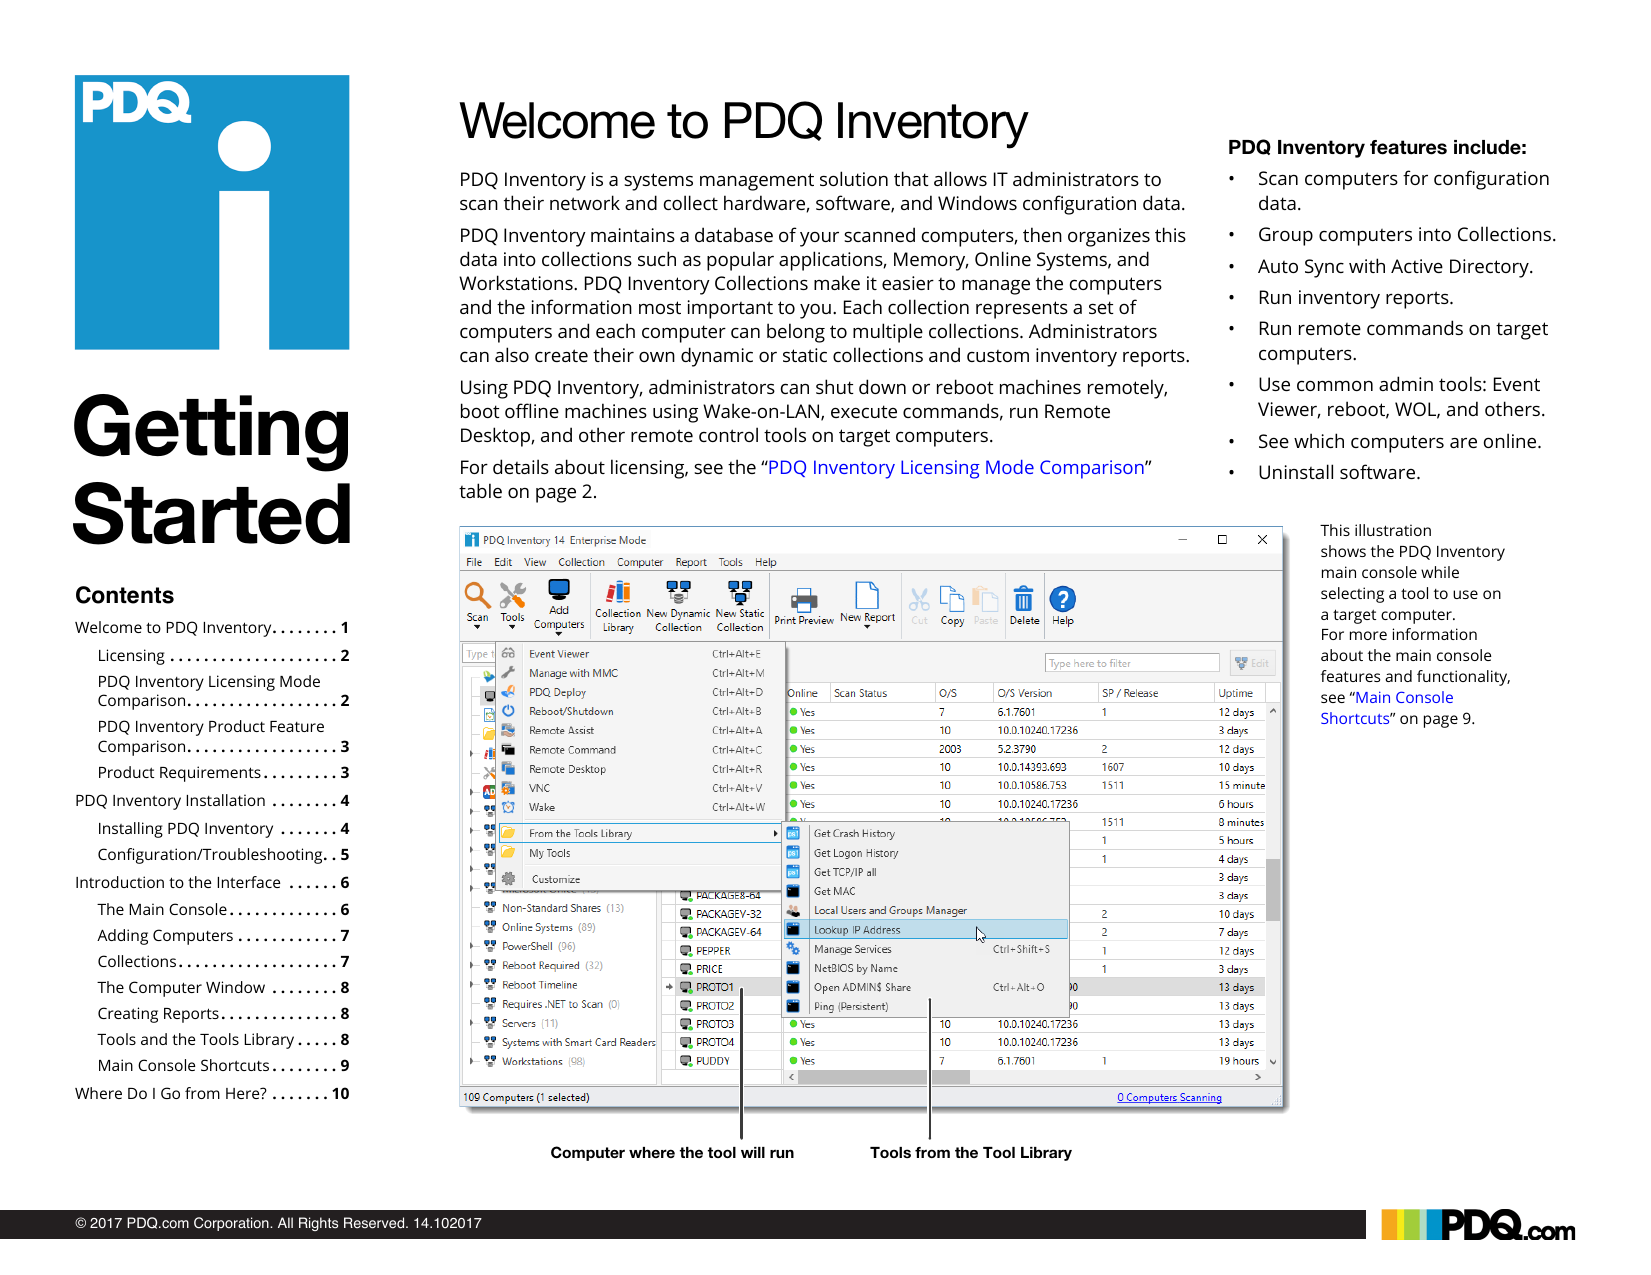 PDQ Inventory Enterprise 19.3.464.0 instal the new version for apple